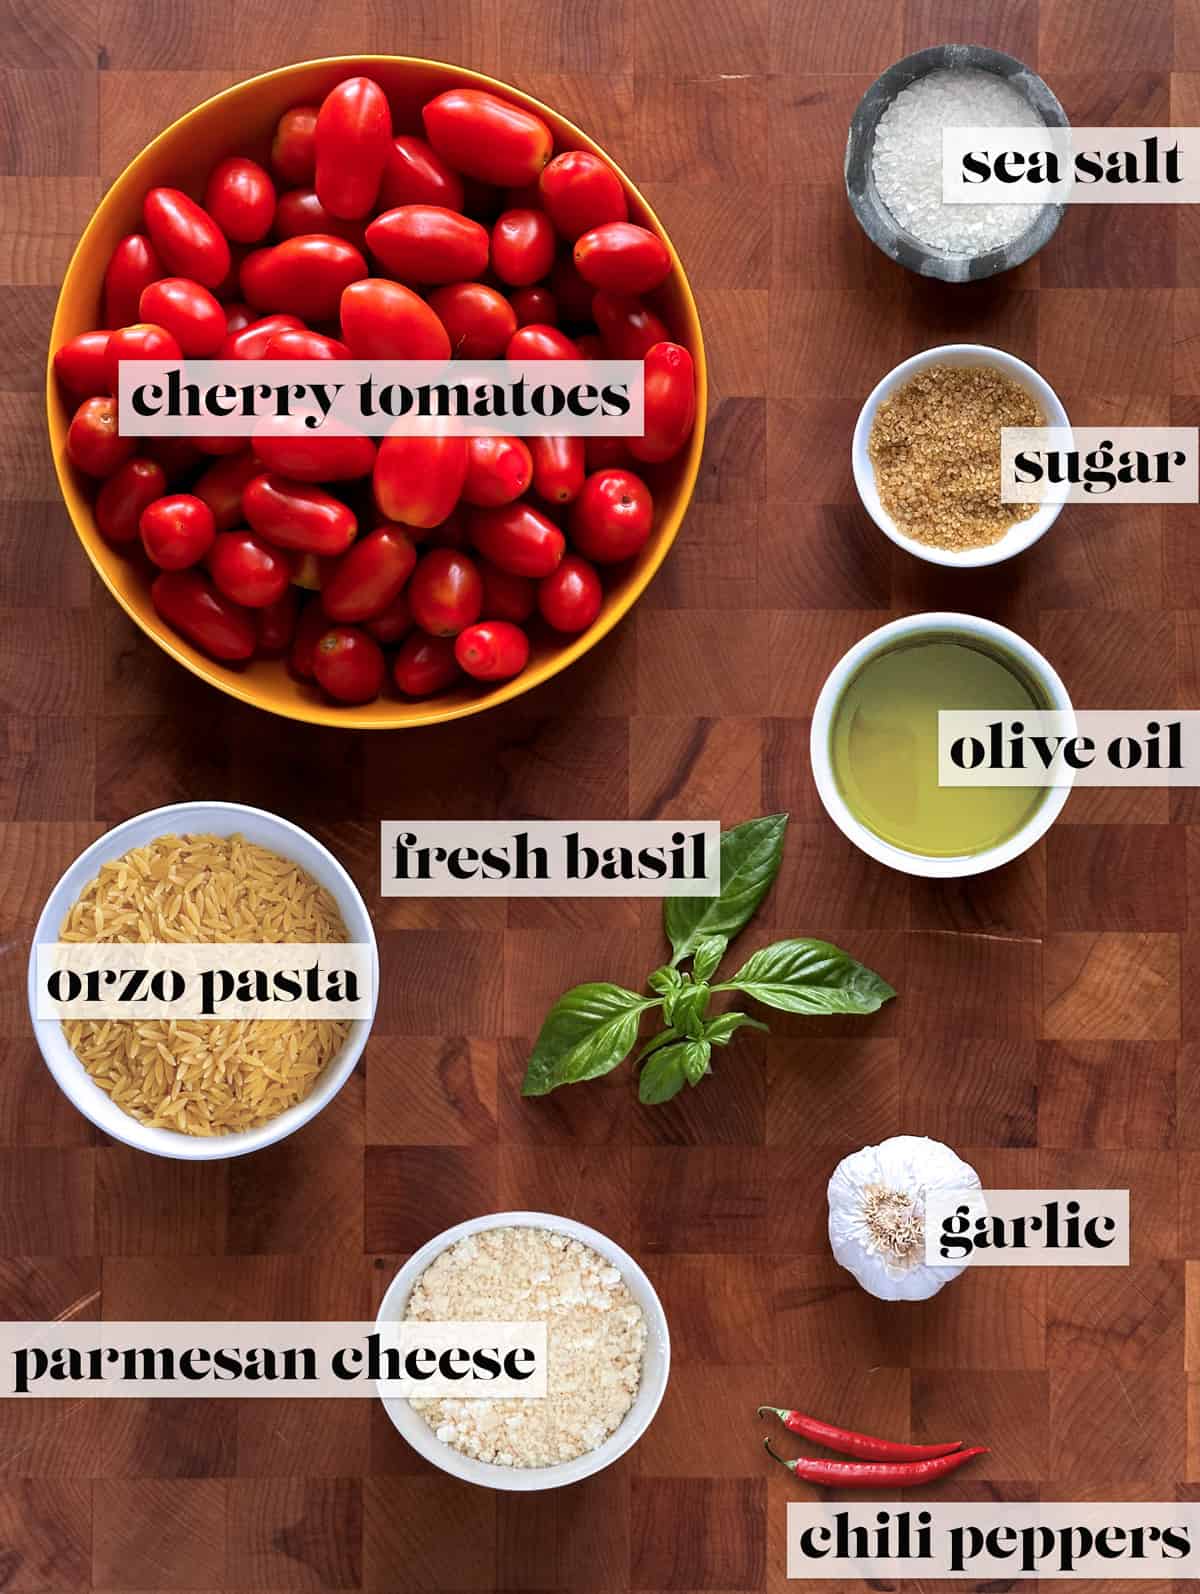 Tomatoes, raw orzo, sea salt, sugar, fresh basil, olive oil chili peppers and parmesan cheese in separate containers on a table.